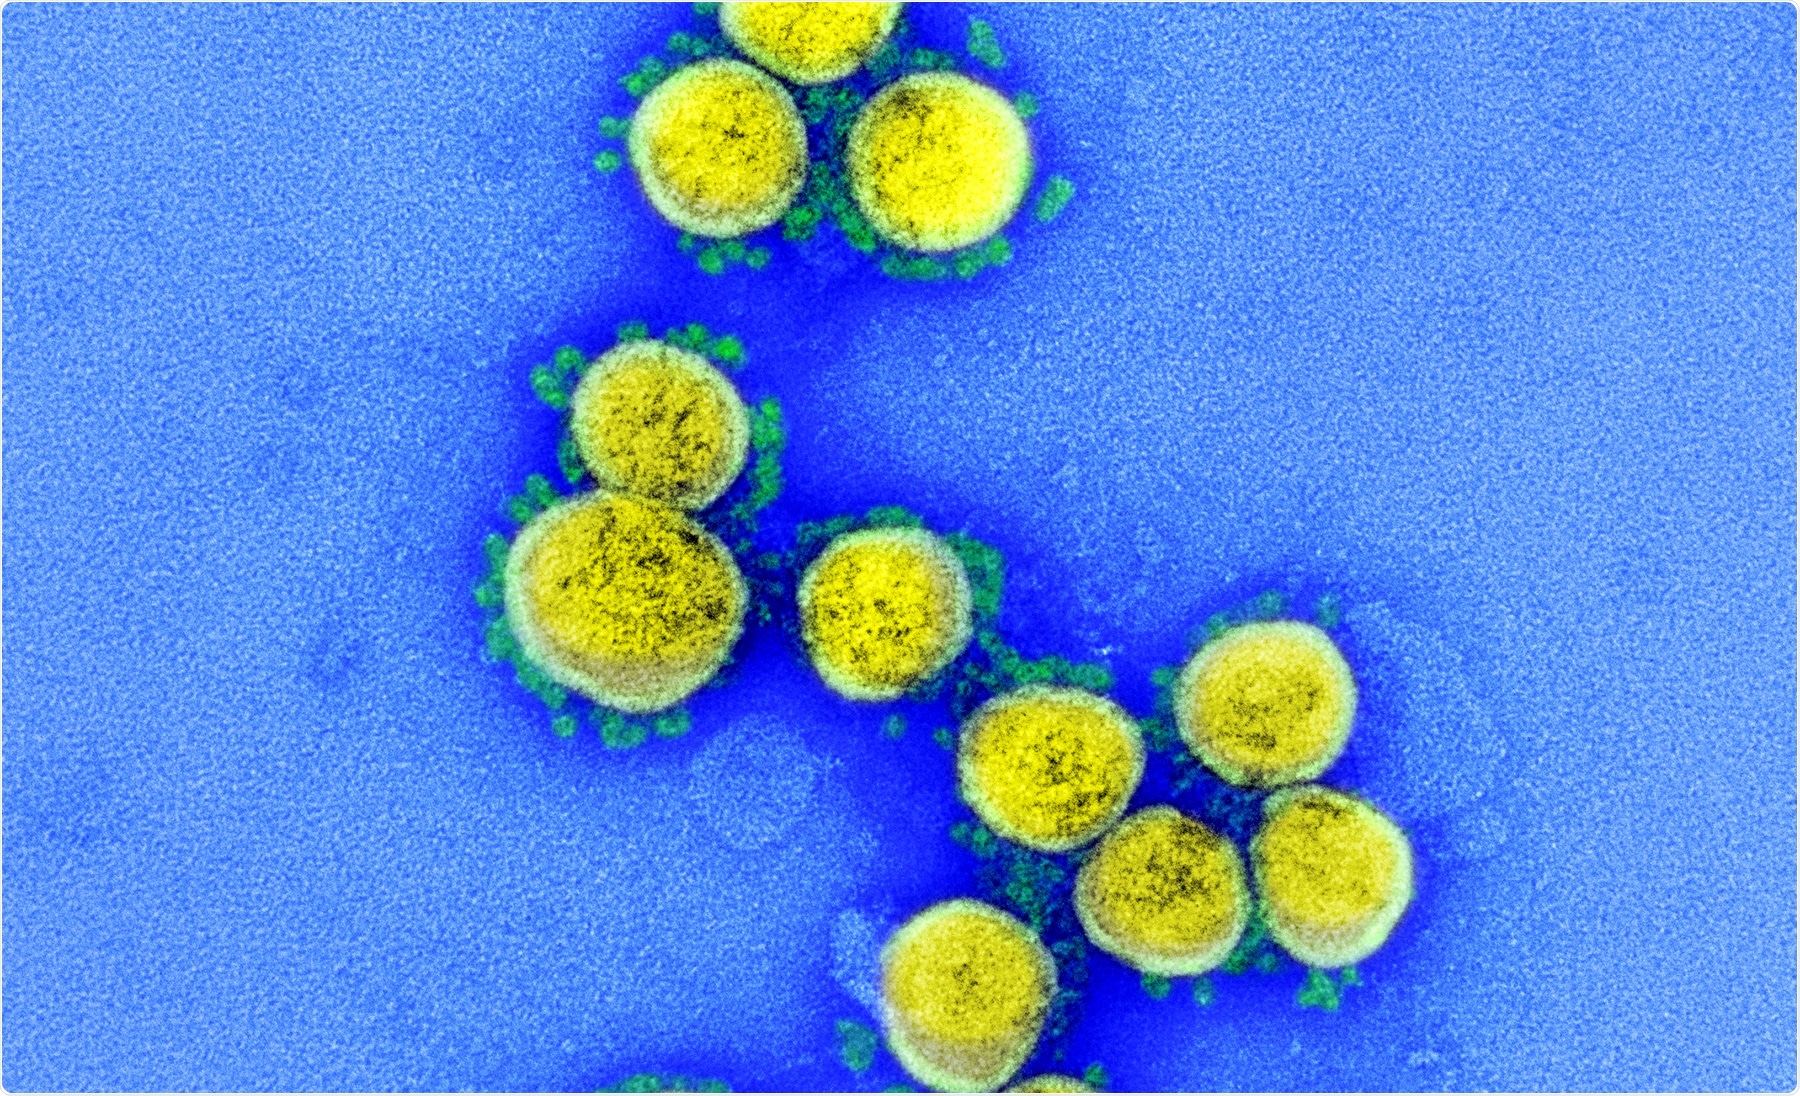 Study: Exposure to SARS-CoV-2 within the household is associated with greater symptom severity and stronger antibody responses in a community-based sample of seropositive adults. Image Cedit: NIAID